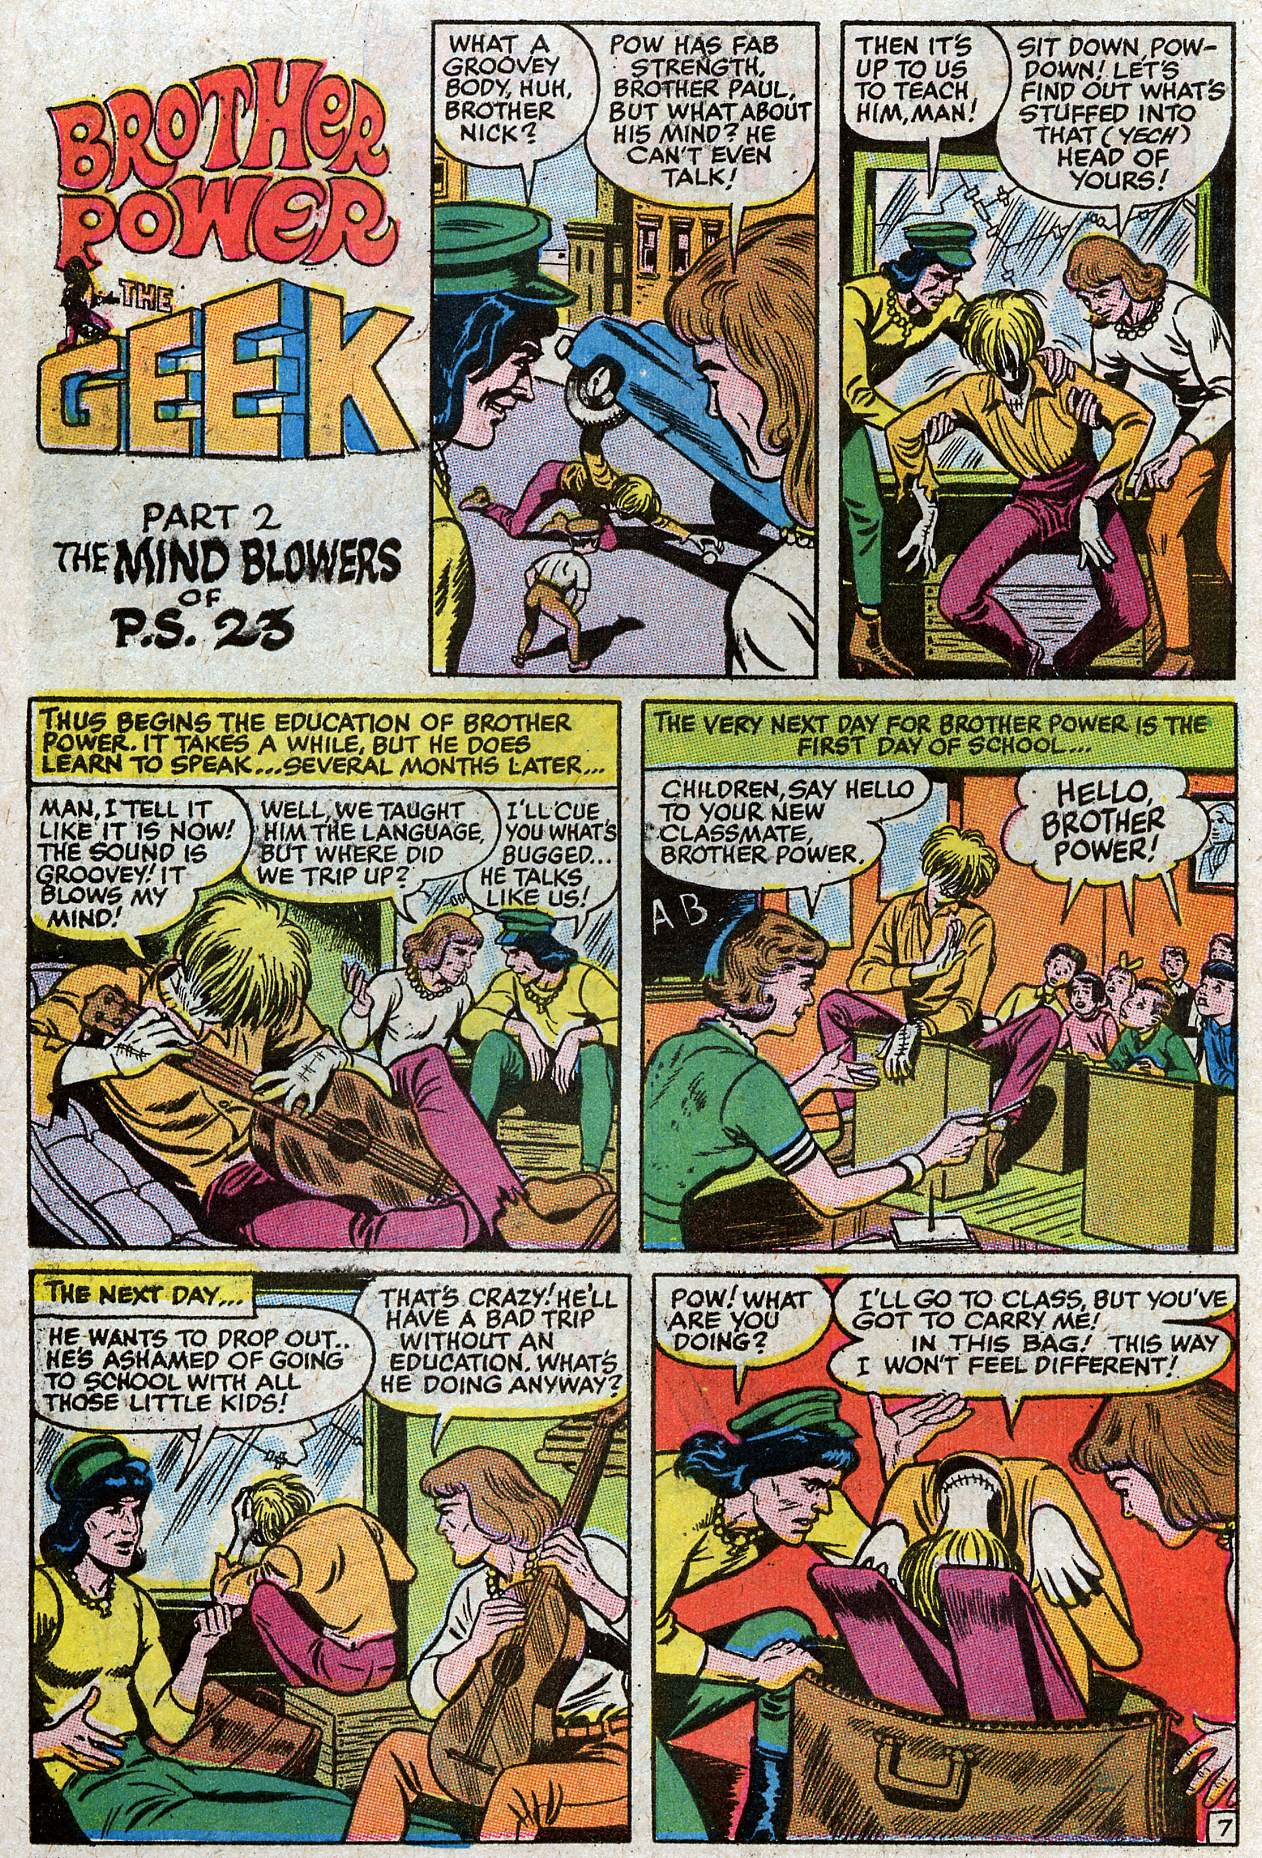 Read online Brother Power the Geek comic -  Issue #1 - 9